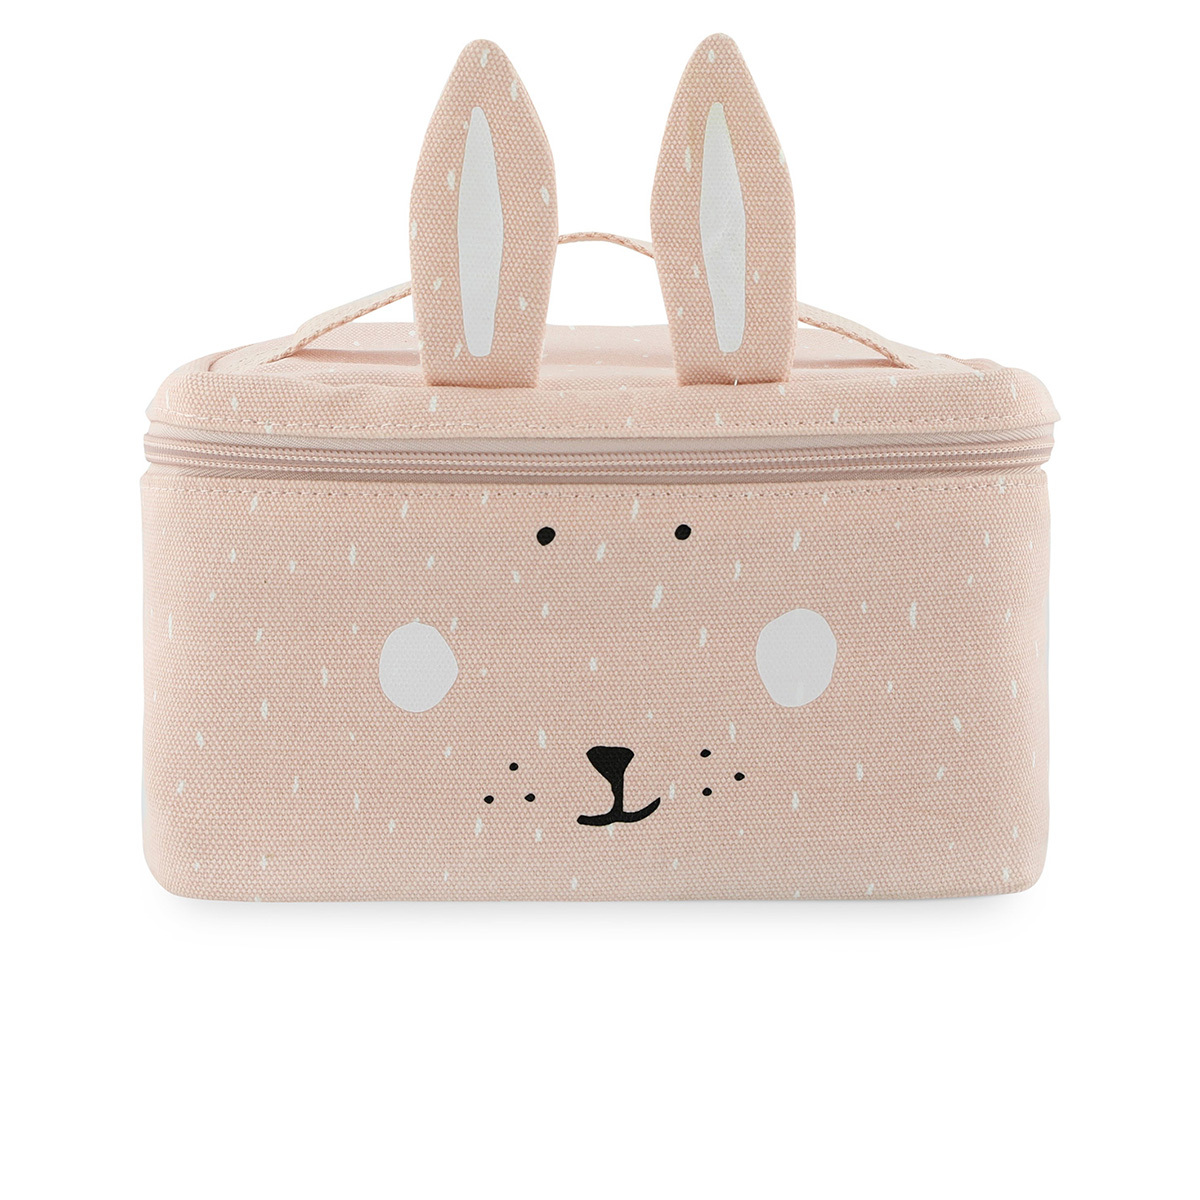 Trixie Baby Sac Lunch - Mrs. Rabbit - Sac isotherme Trixie Baby